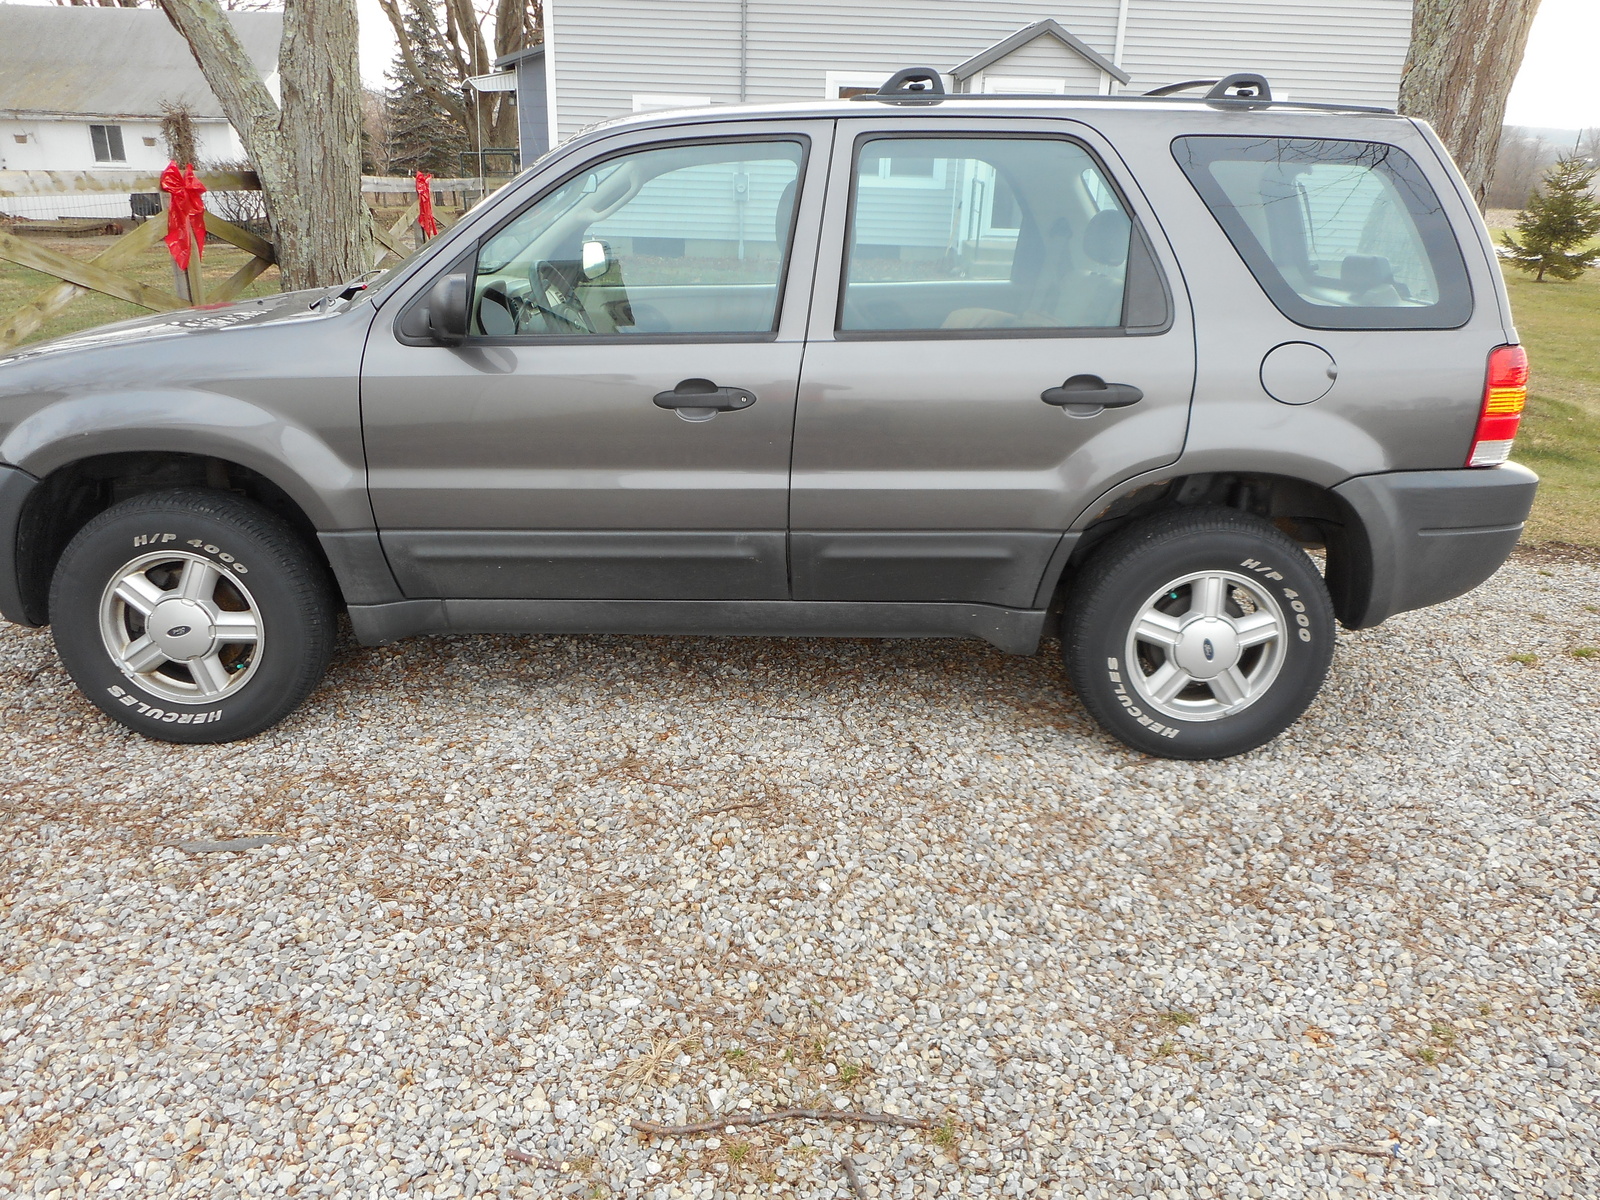 2003 Ford escape 4 cylinder review #3